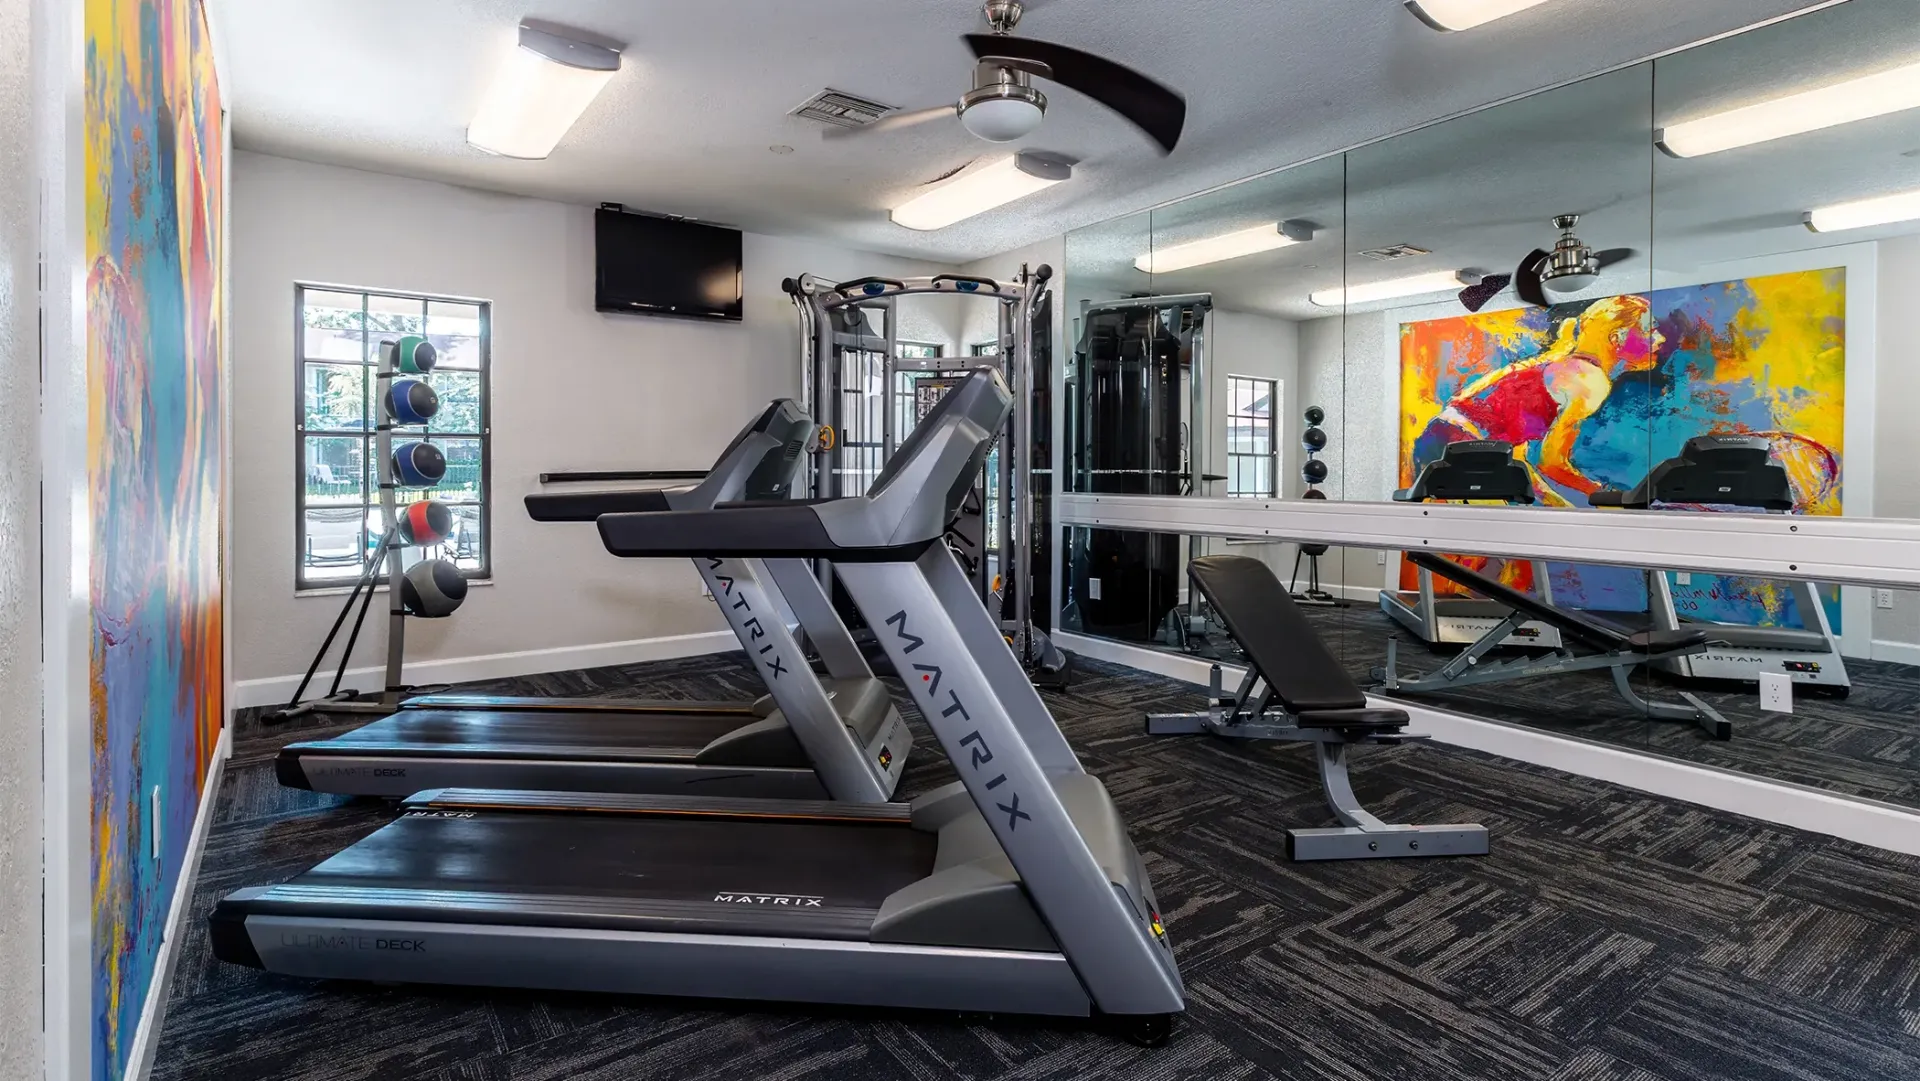 The 24-hour fitness center equipped with cardio and weight training equipment